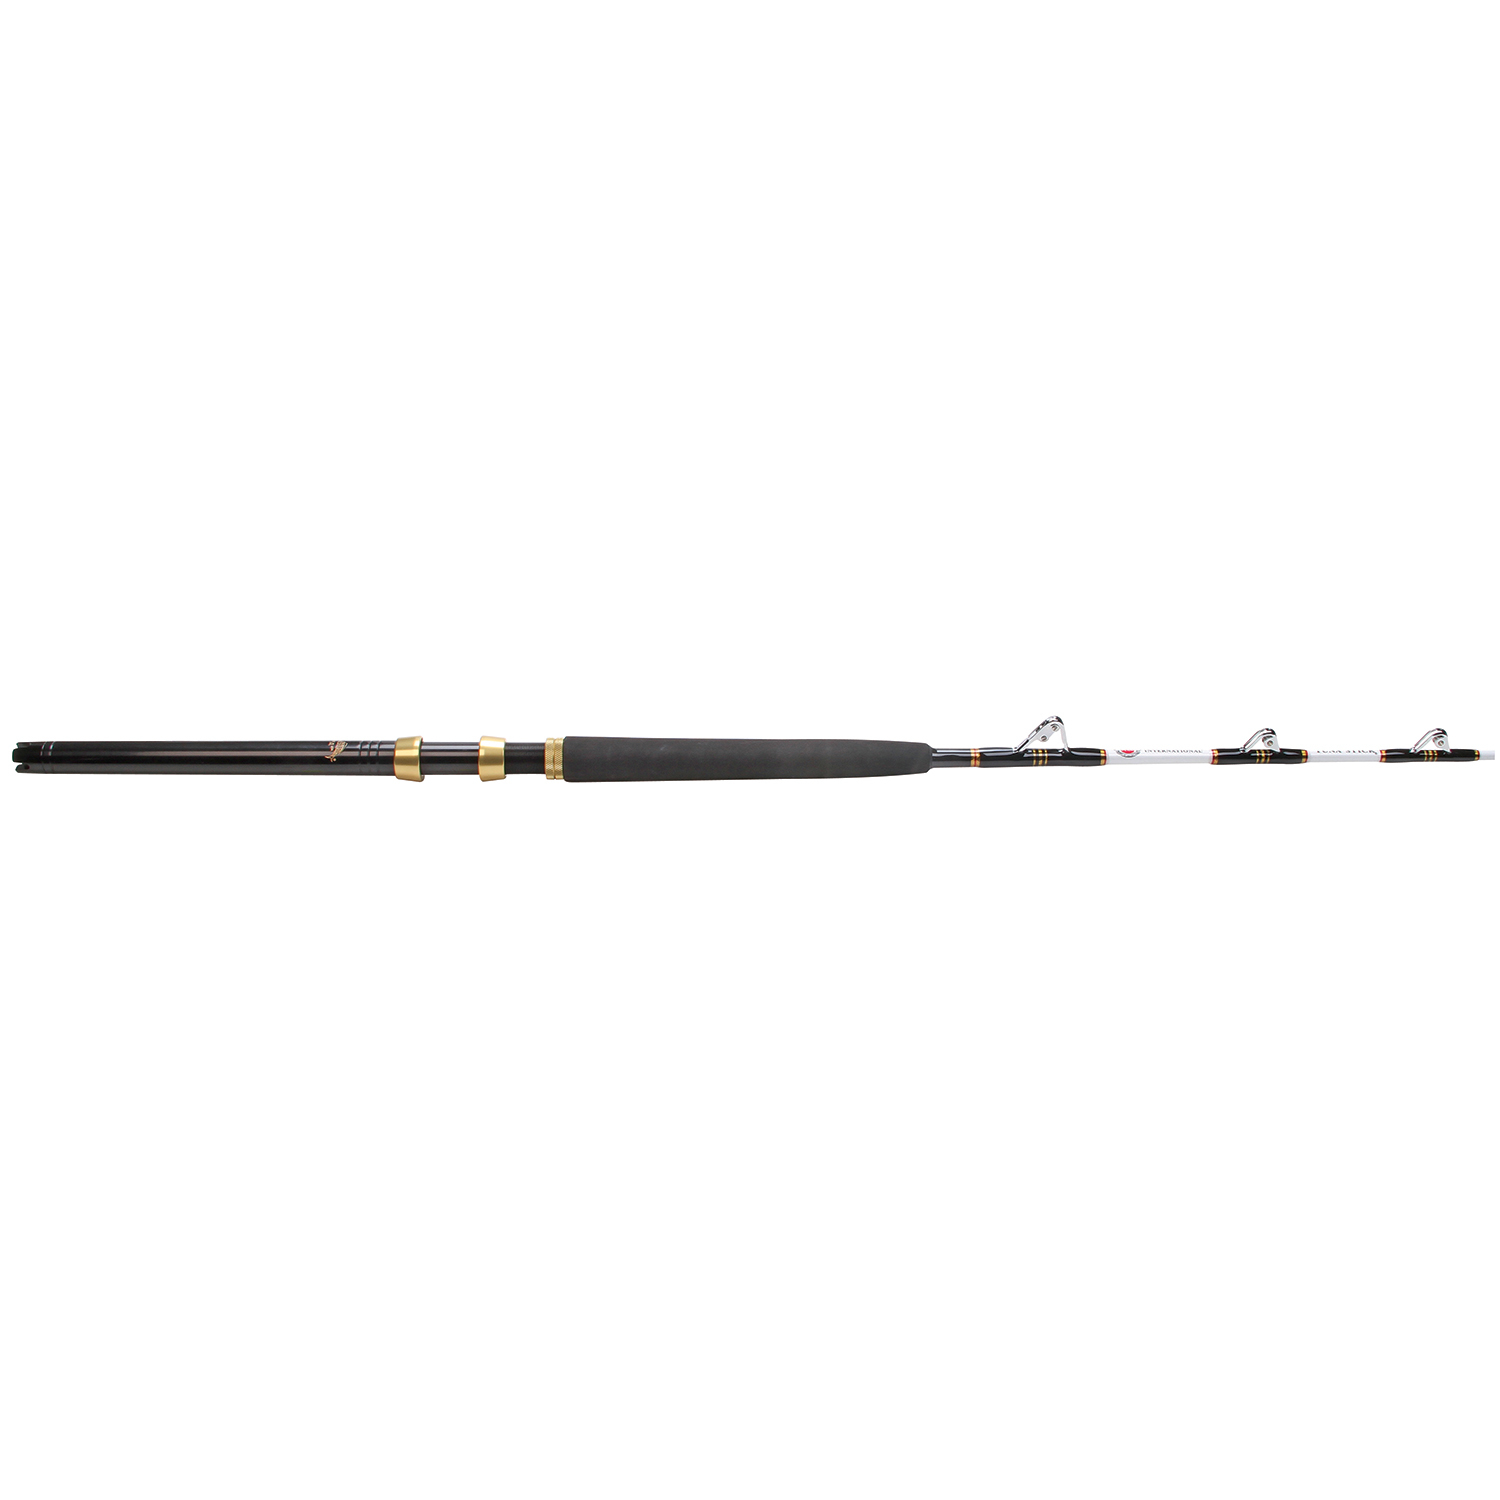 PENN 6' Tuna Stick Conventional Stand-Up Rod, Heavy Power